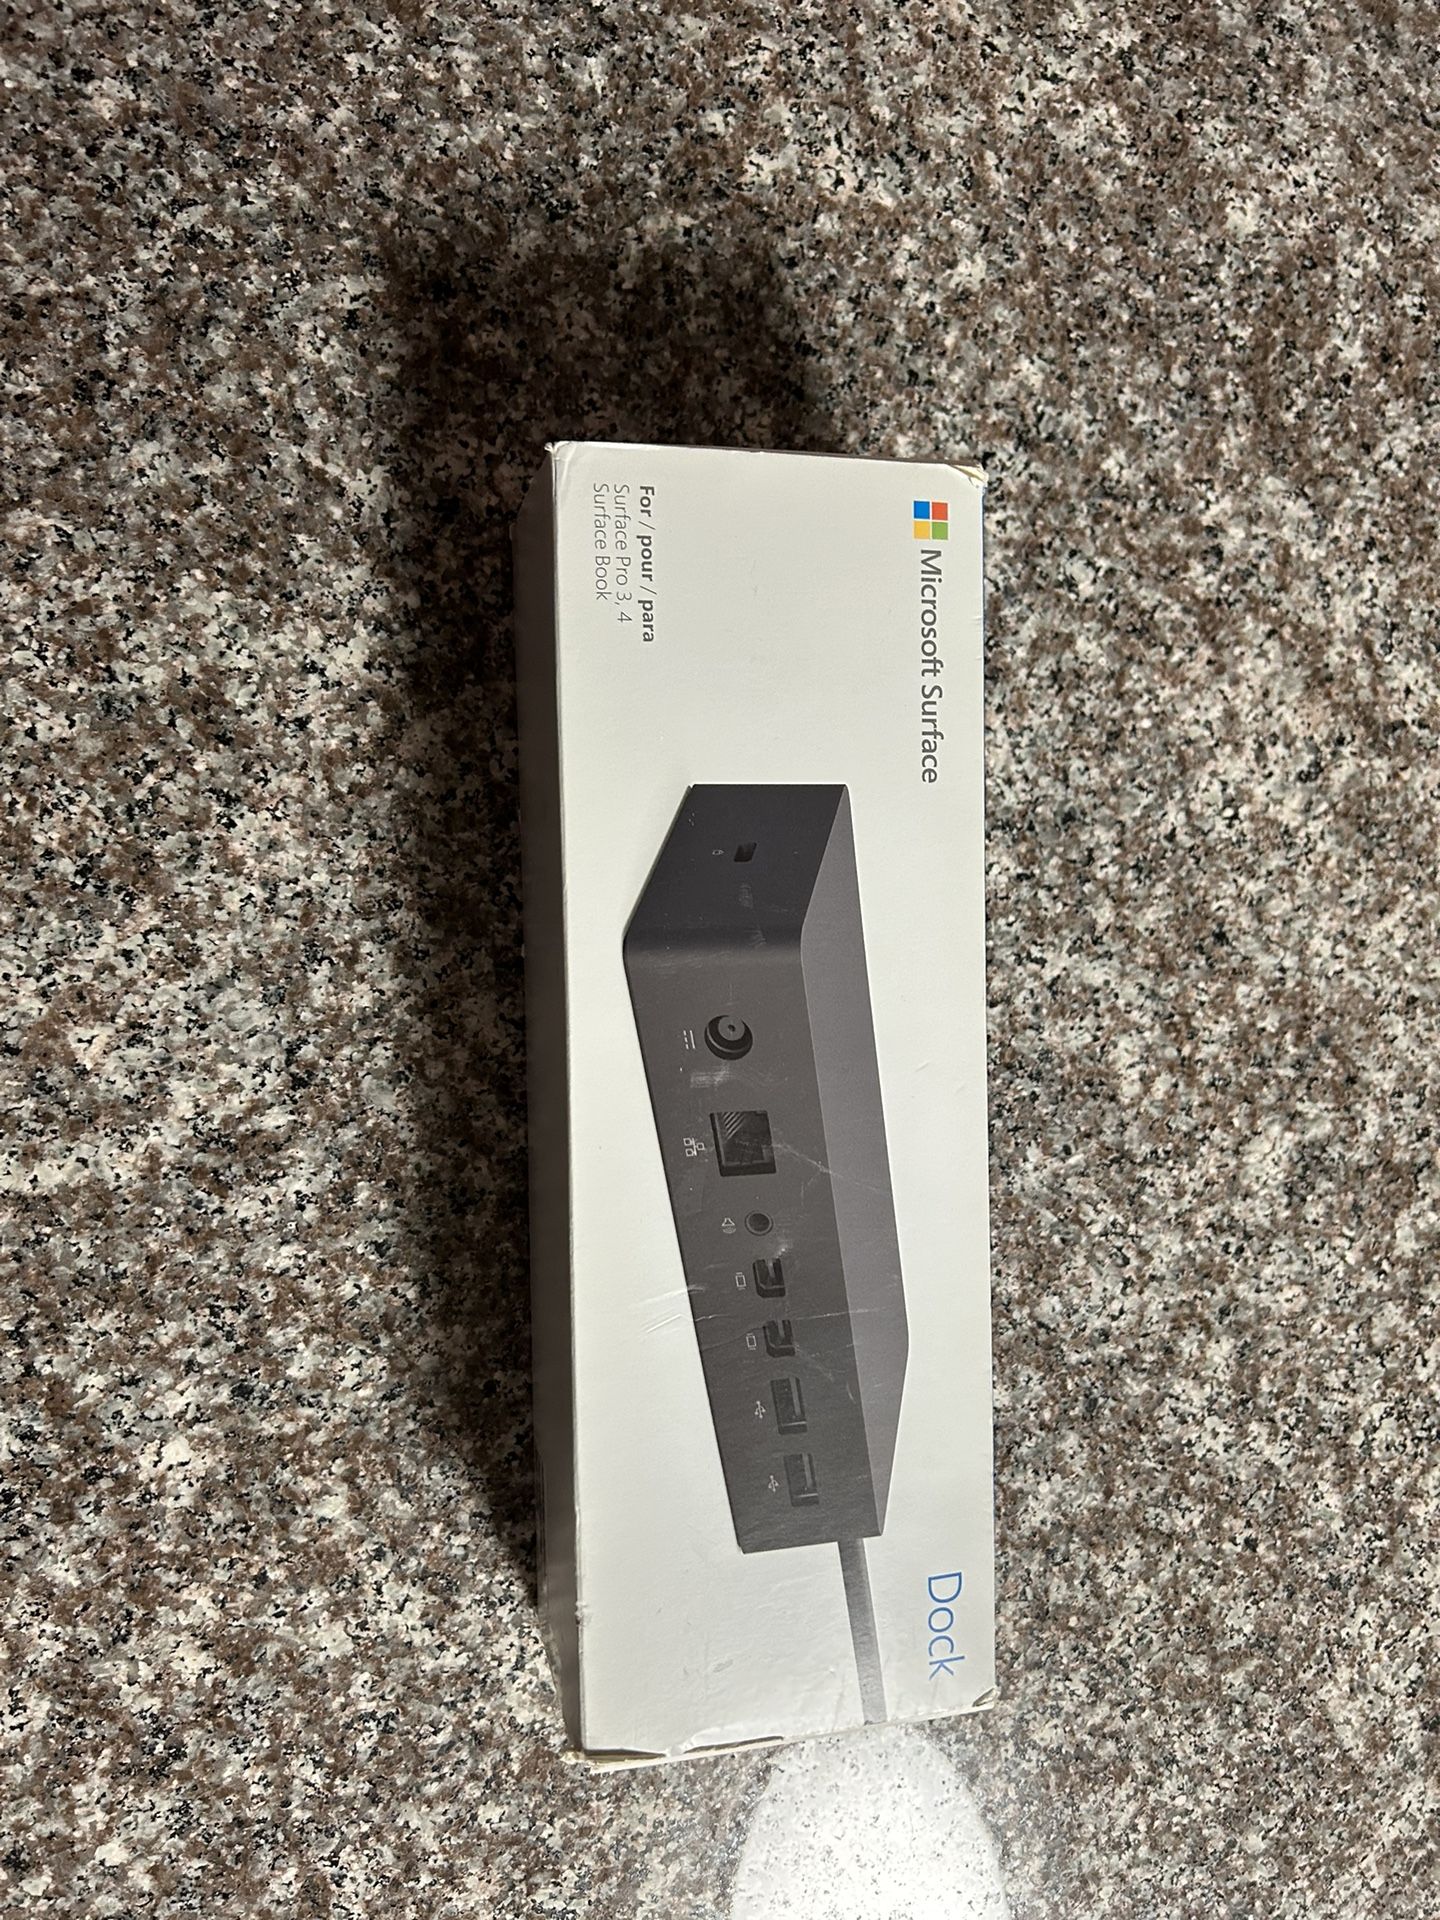 Microsoft Surface Dock (Compatible with Surface Pro 3, Surface Pro 4, and Surface Book